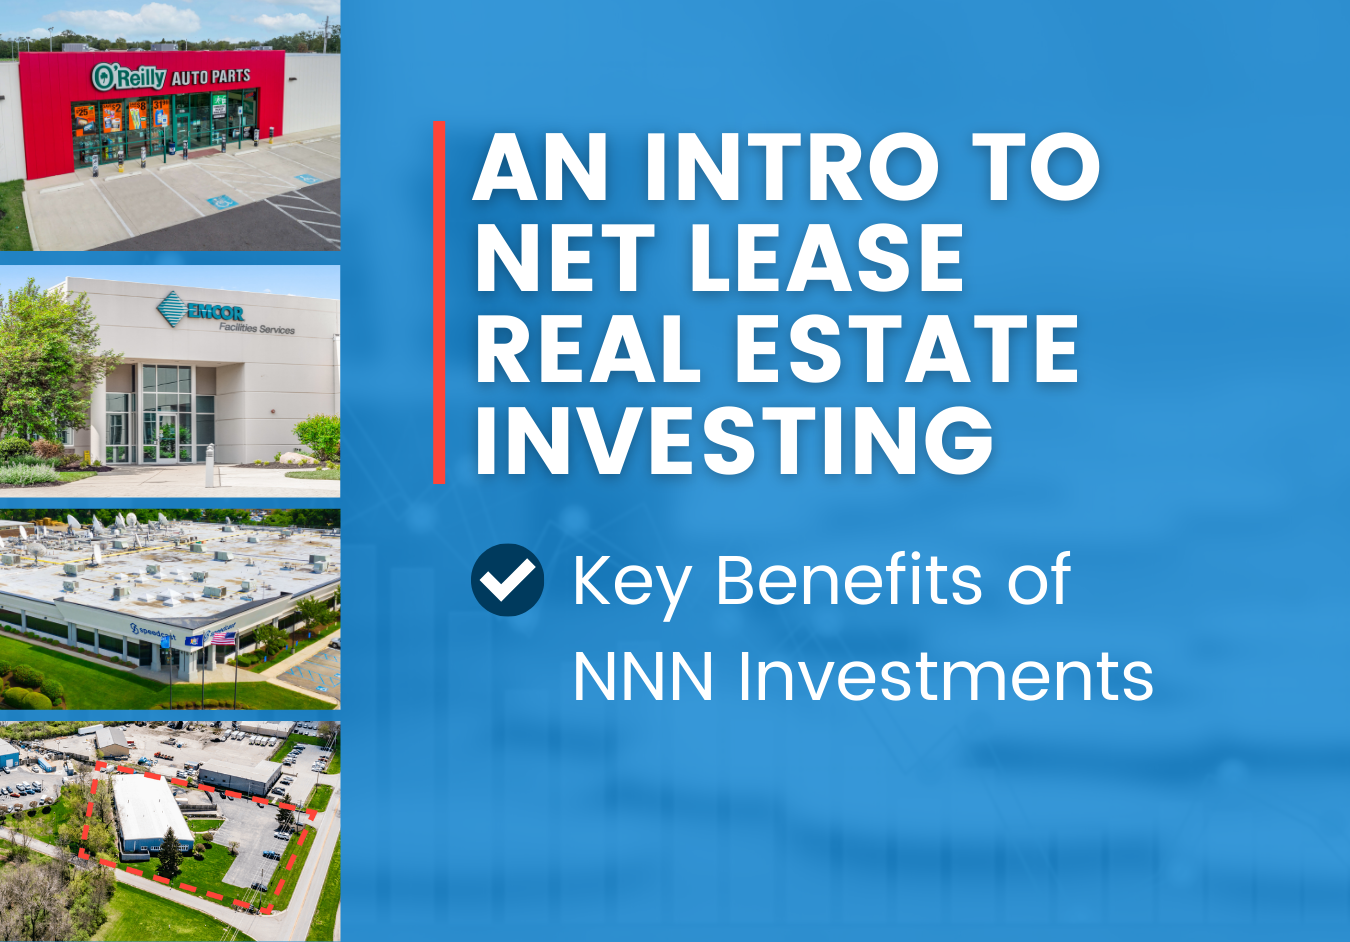 An Intro to Net Lease Real Estate Investing by B+E